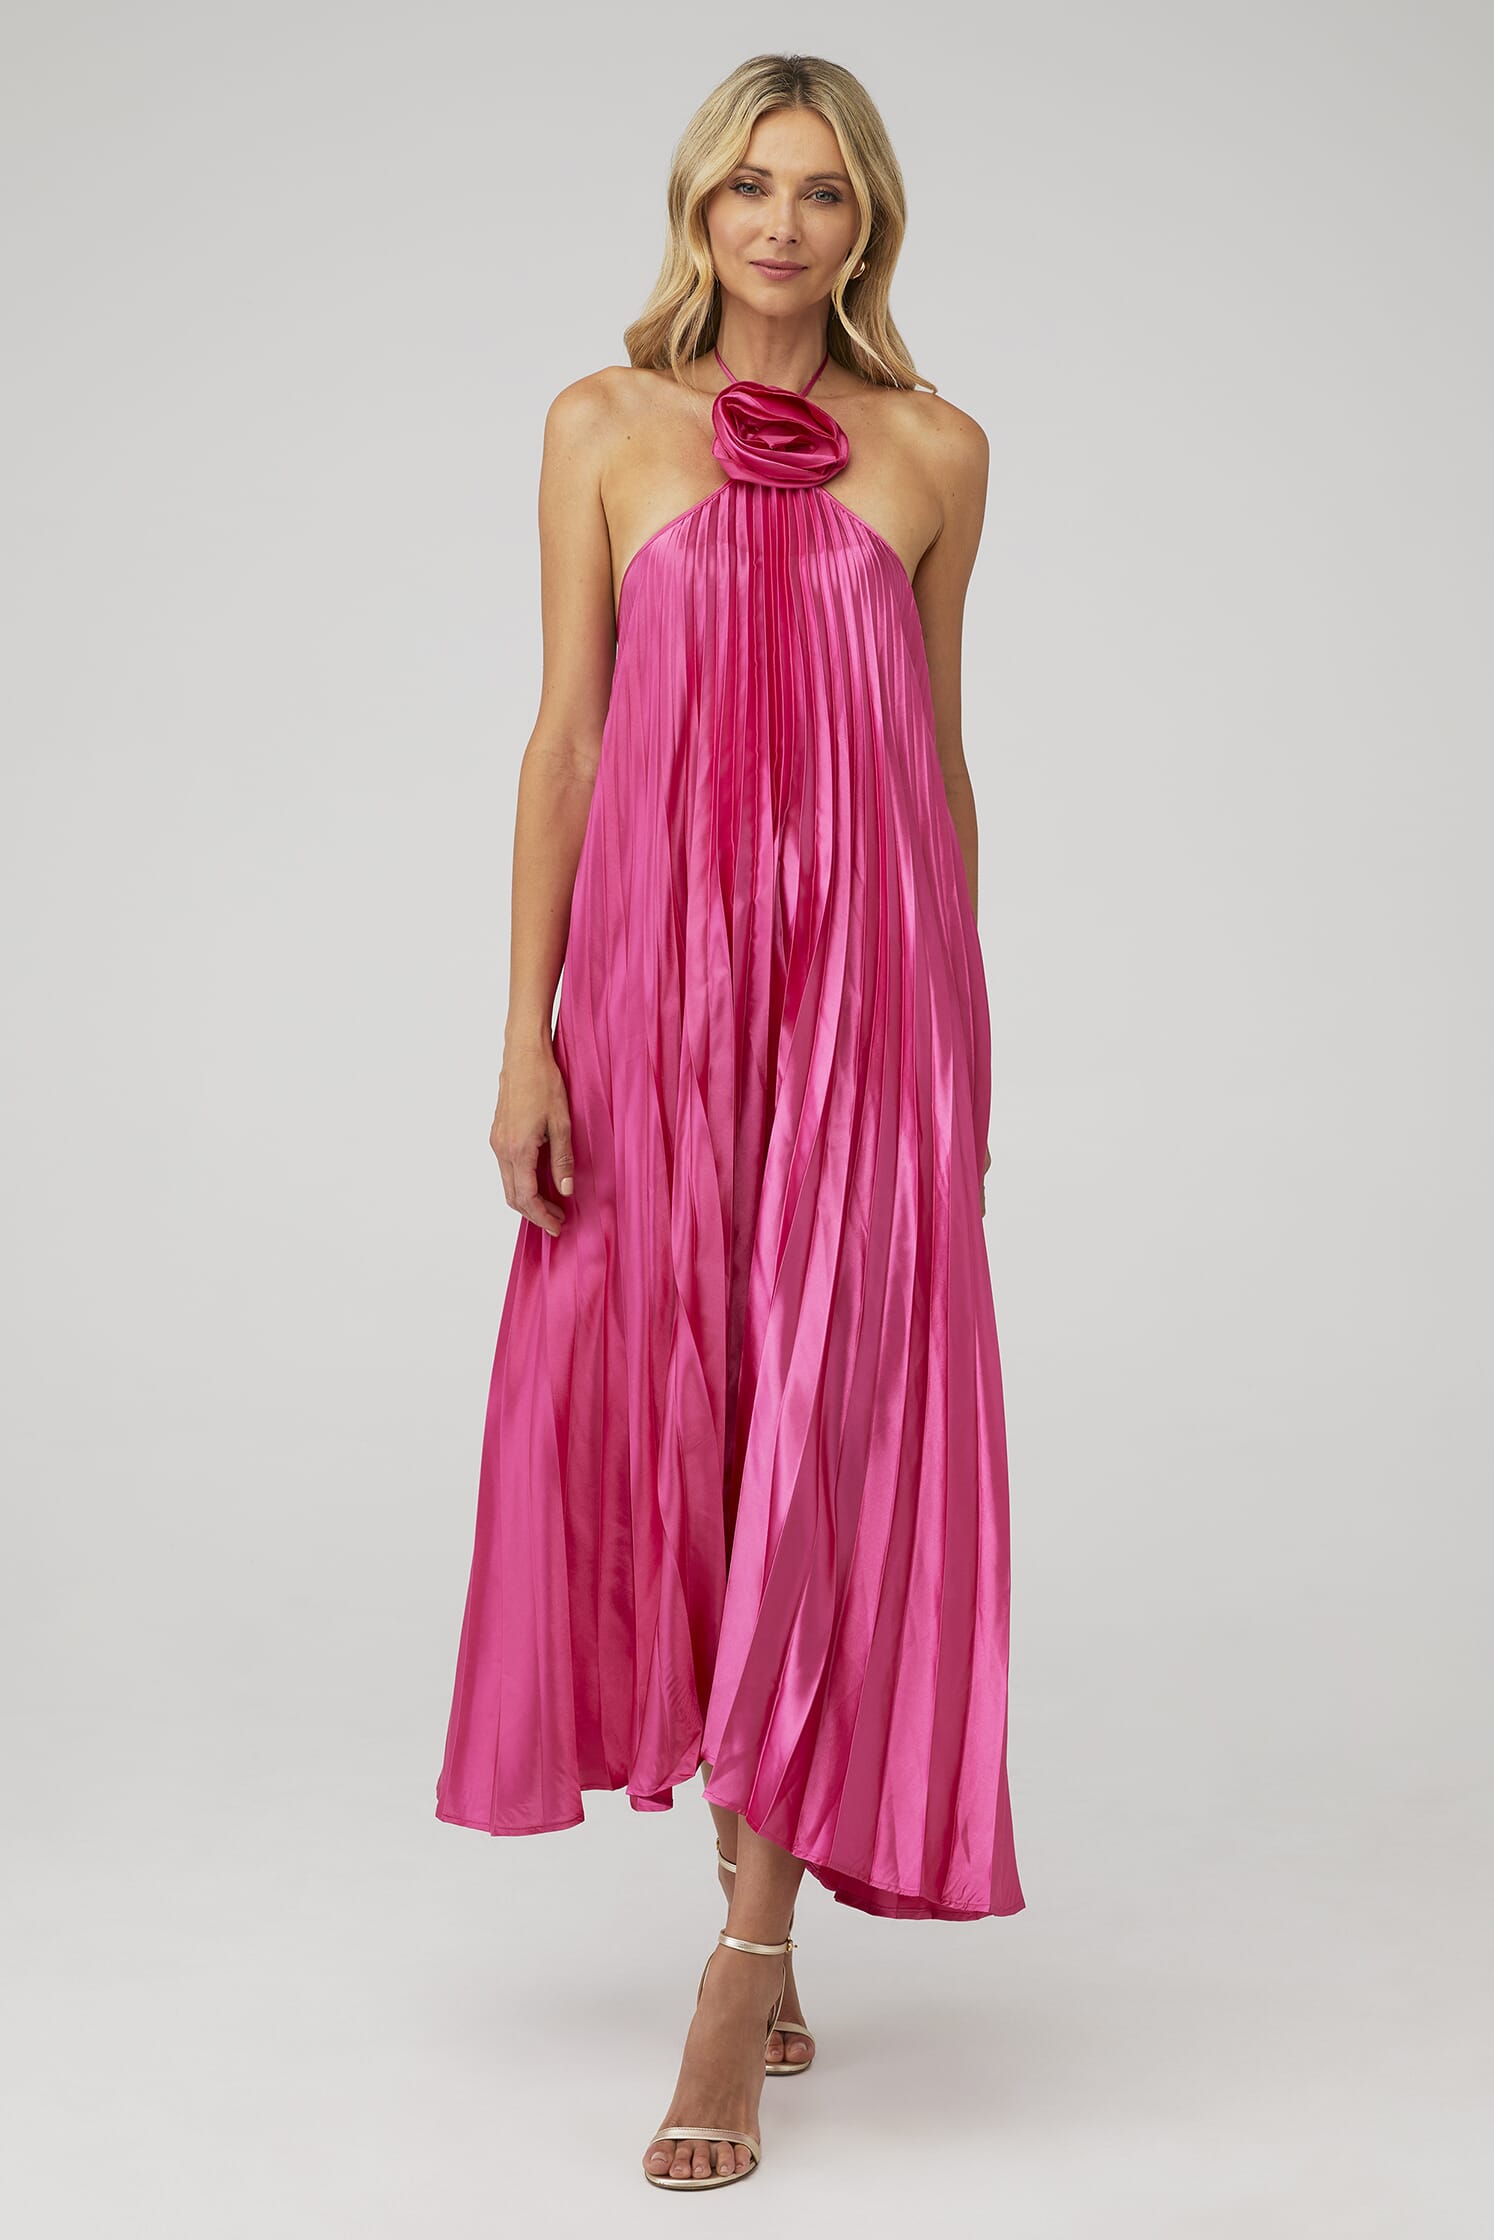 Delfi Collective | Gisele Dress in Pink| FashionPass